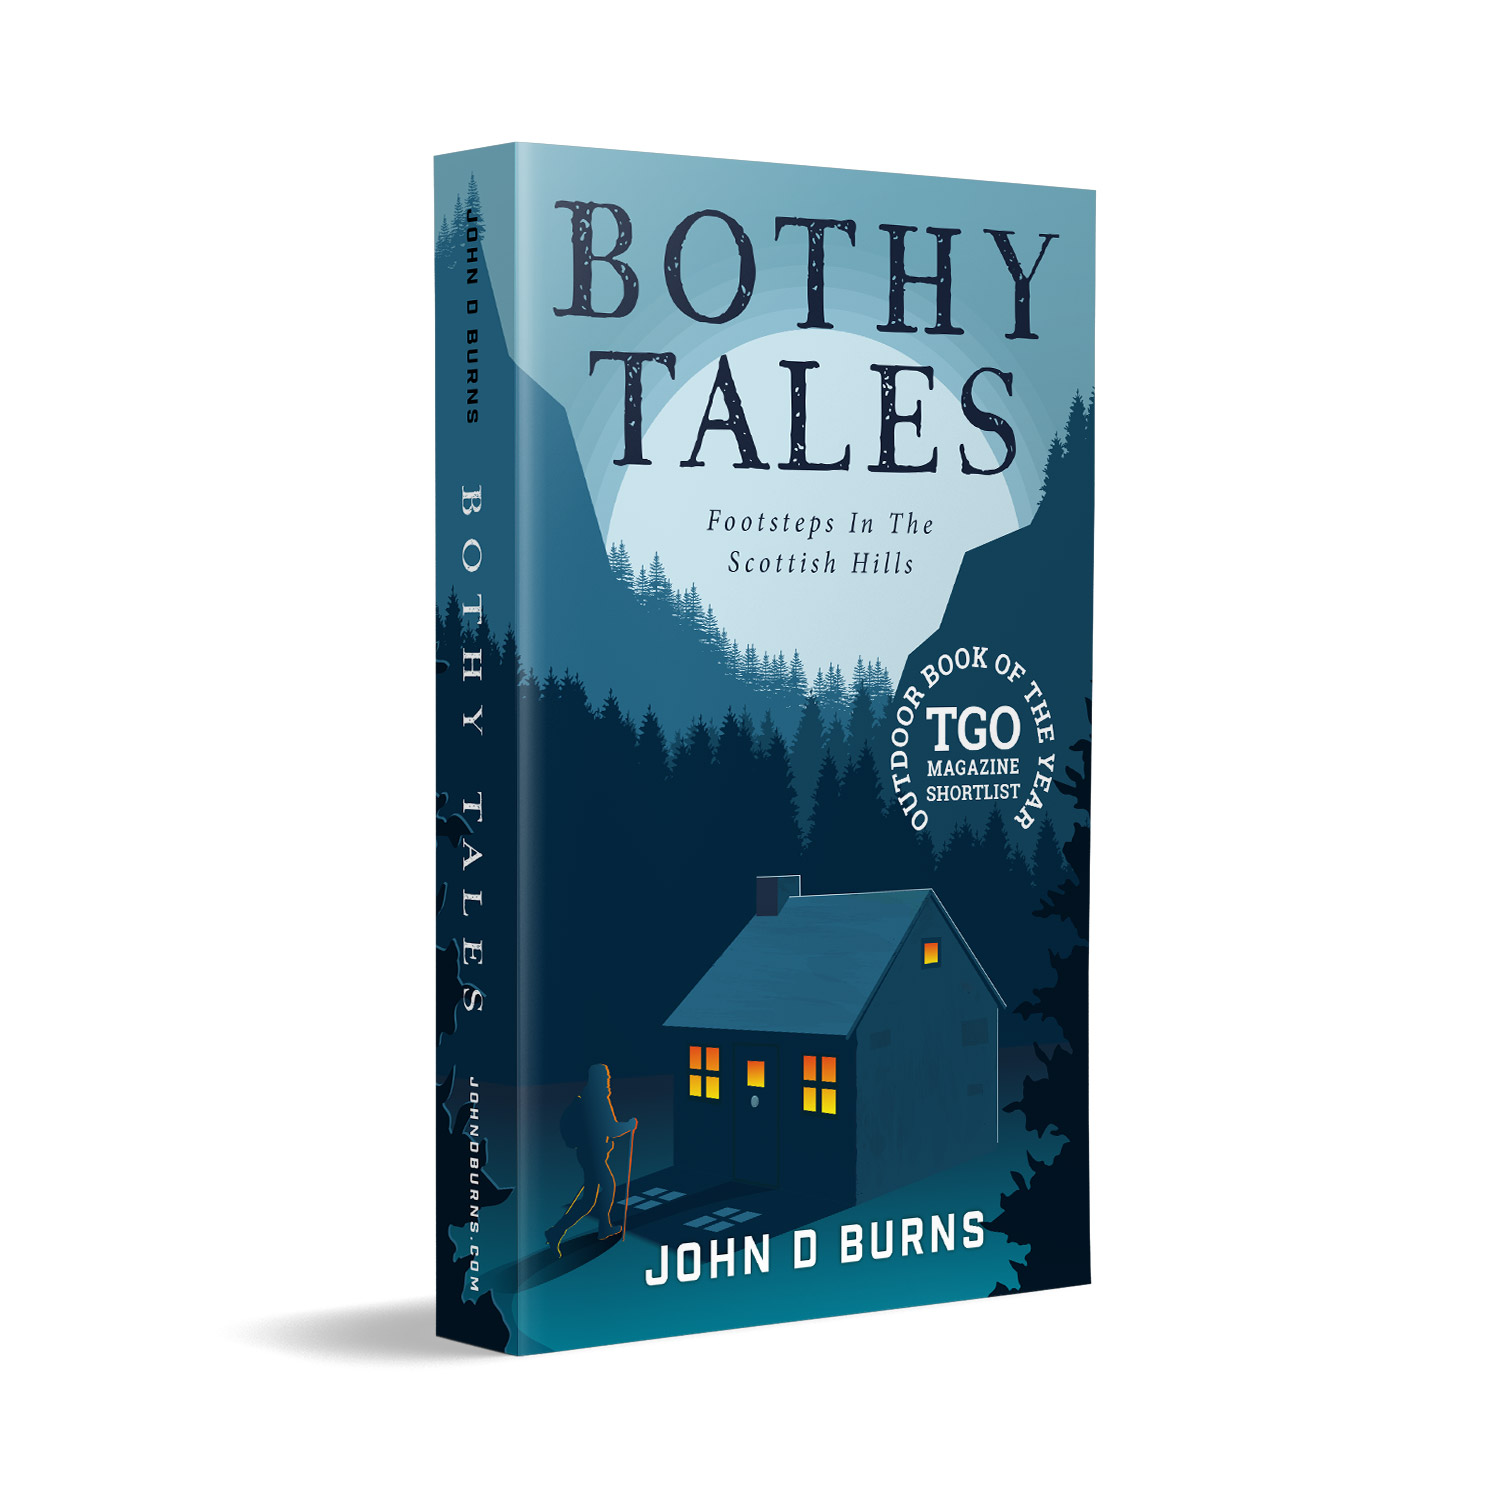 'Bothy Tales' is a bespoke cover design for a personal, retrospective hillwalking memoir. The book cover was designed by Mark Thomas, of coverness.com. To find out more about my book design services, please visit www.coverness.com.